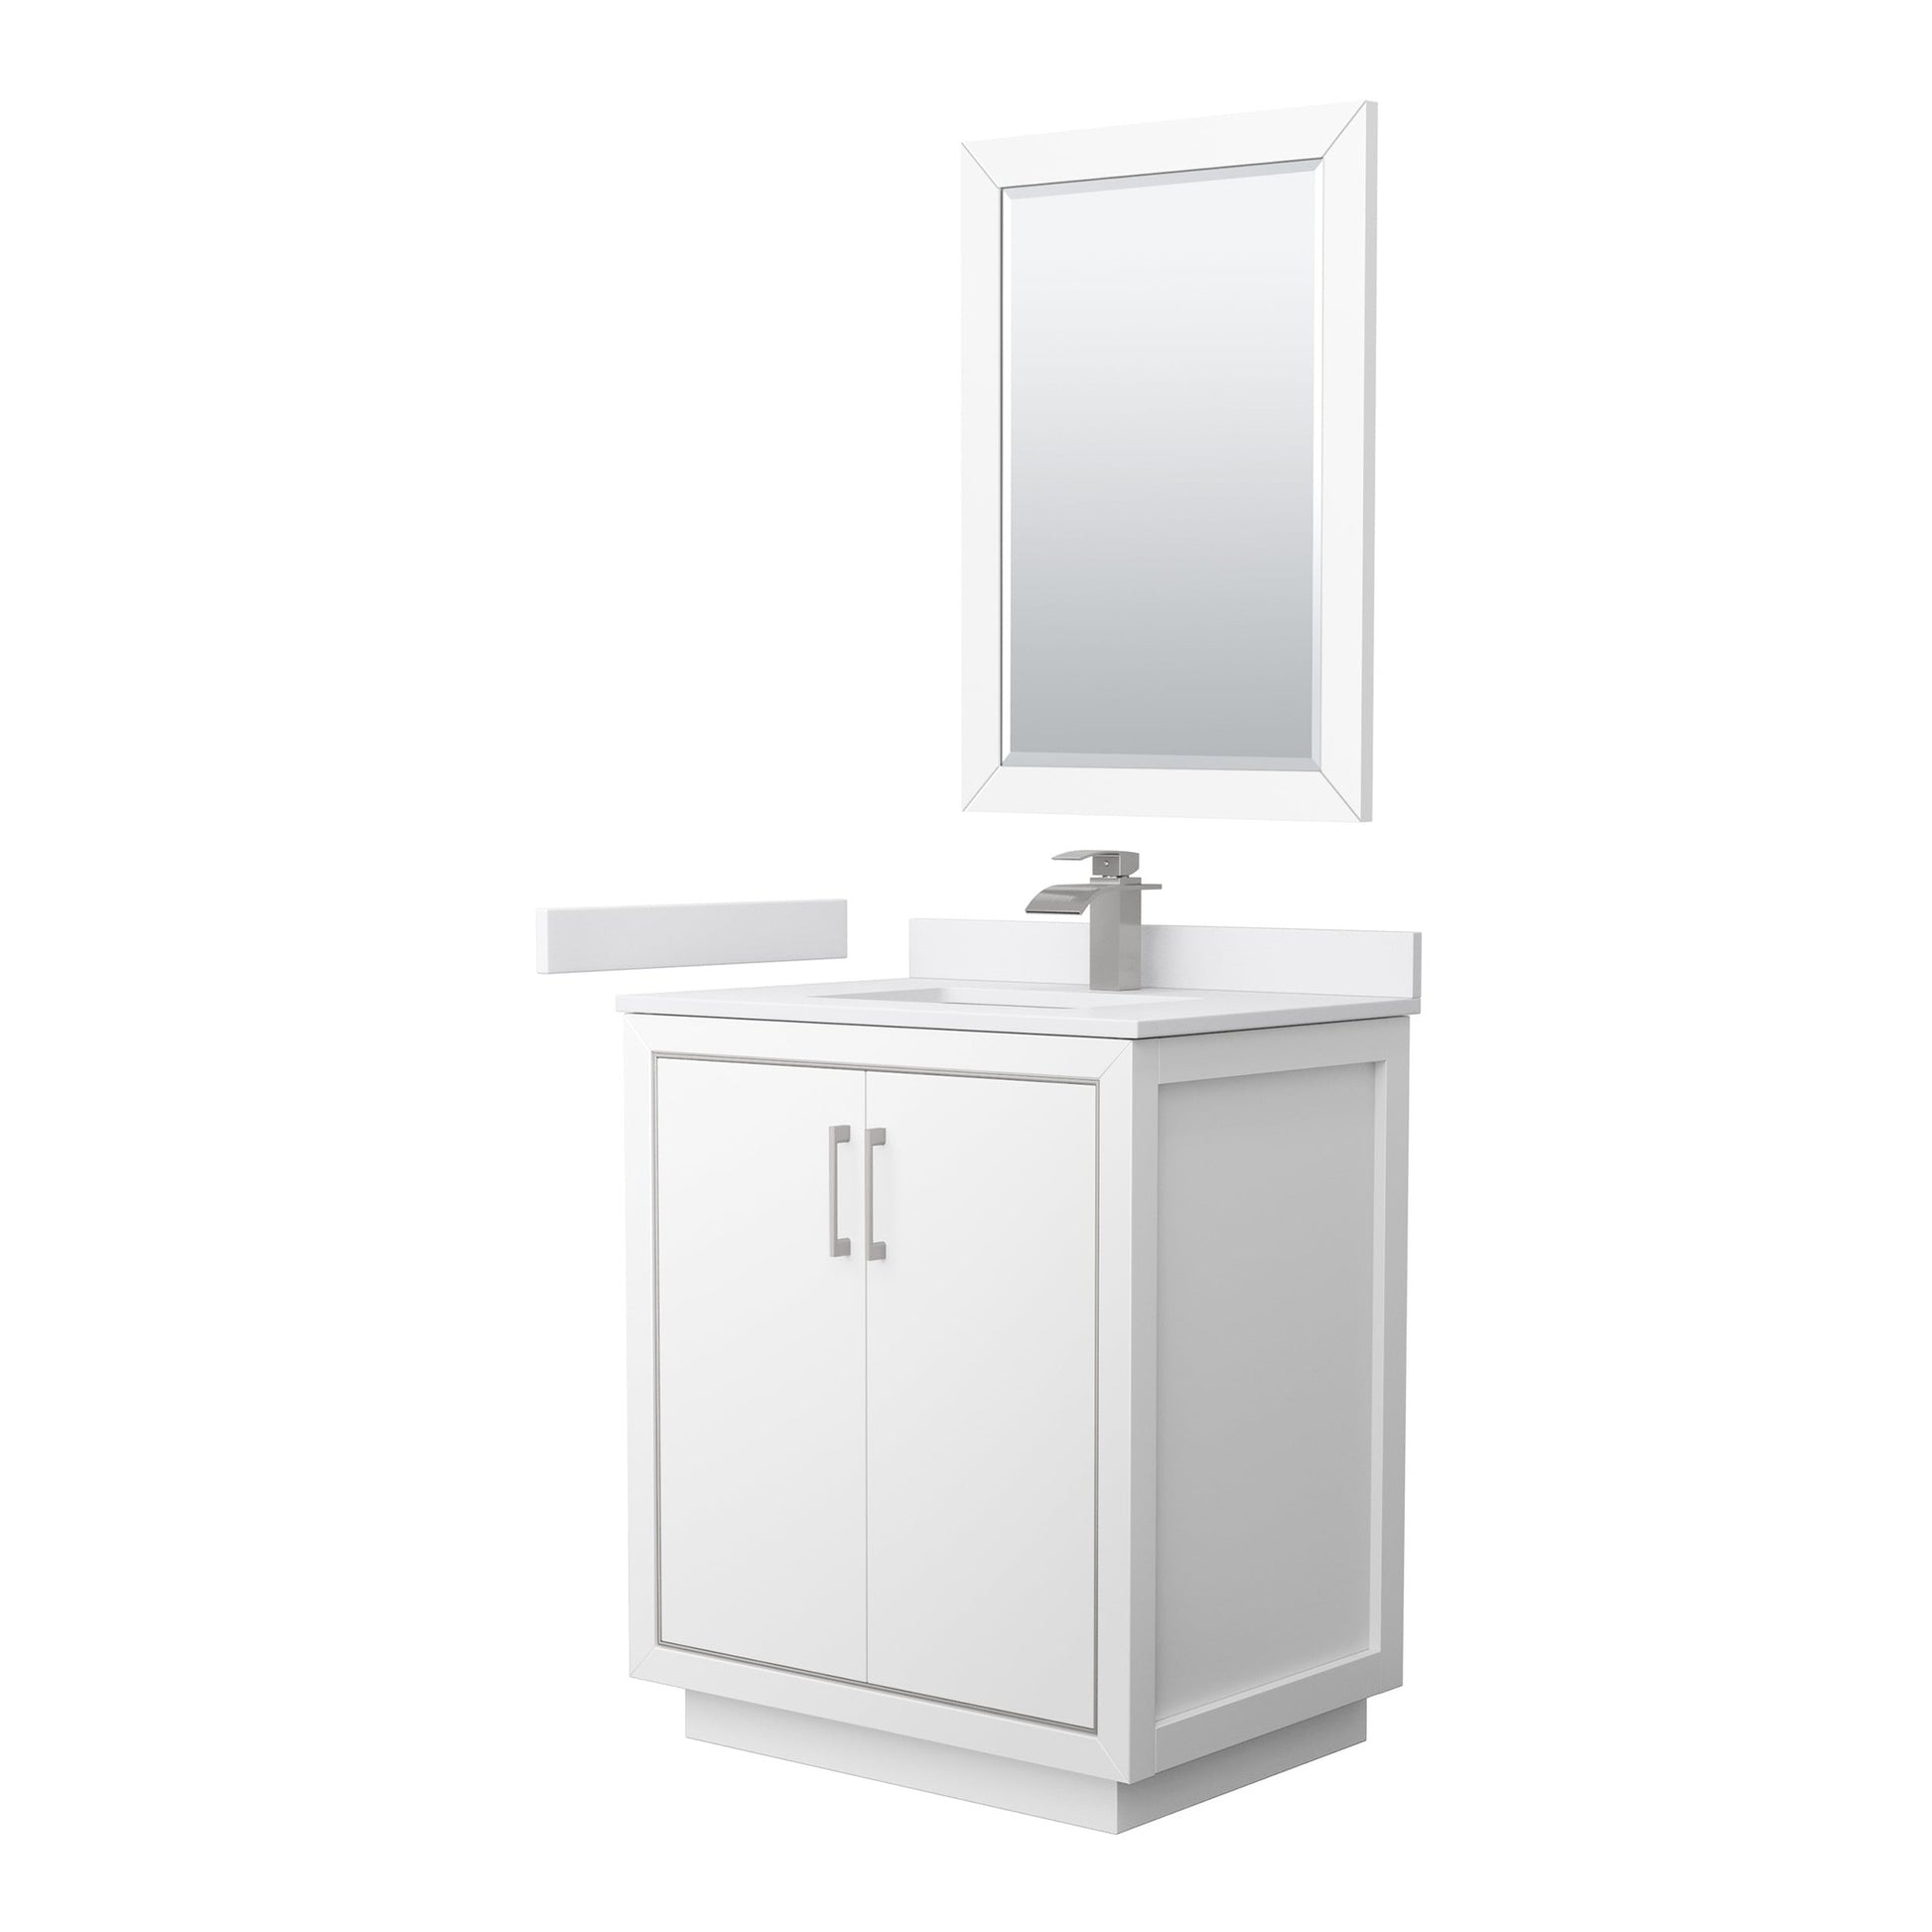 Wyndham Collection Icon 30" Single Bathroom Vanity in White, White Cultured Marble Countertop, Undermount Square Sink, Brushed Nickel Trim, 24" Mirror